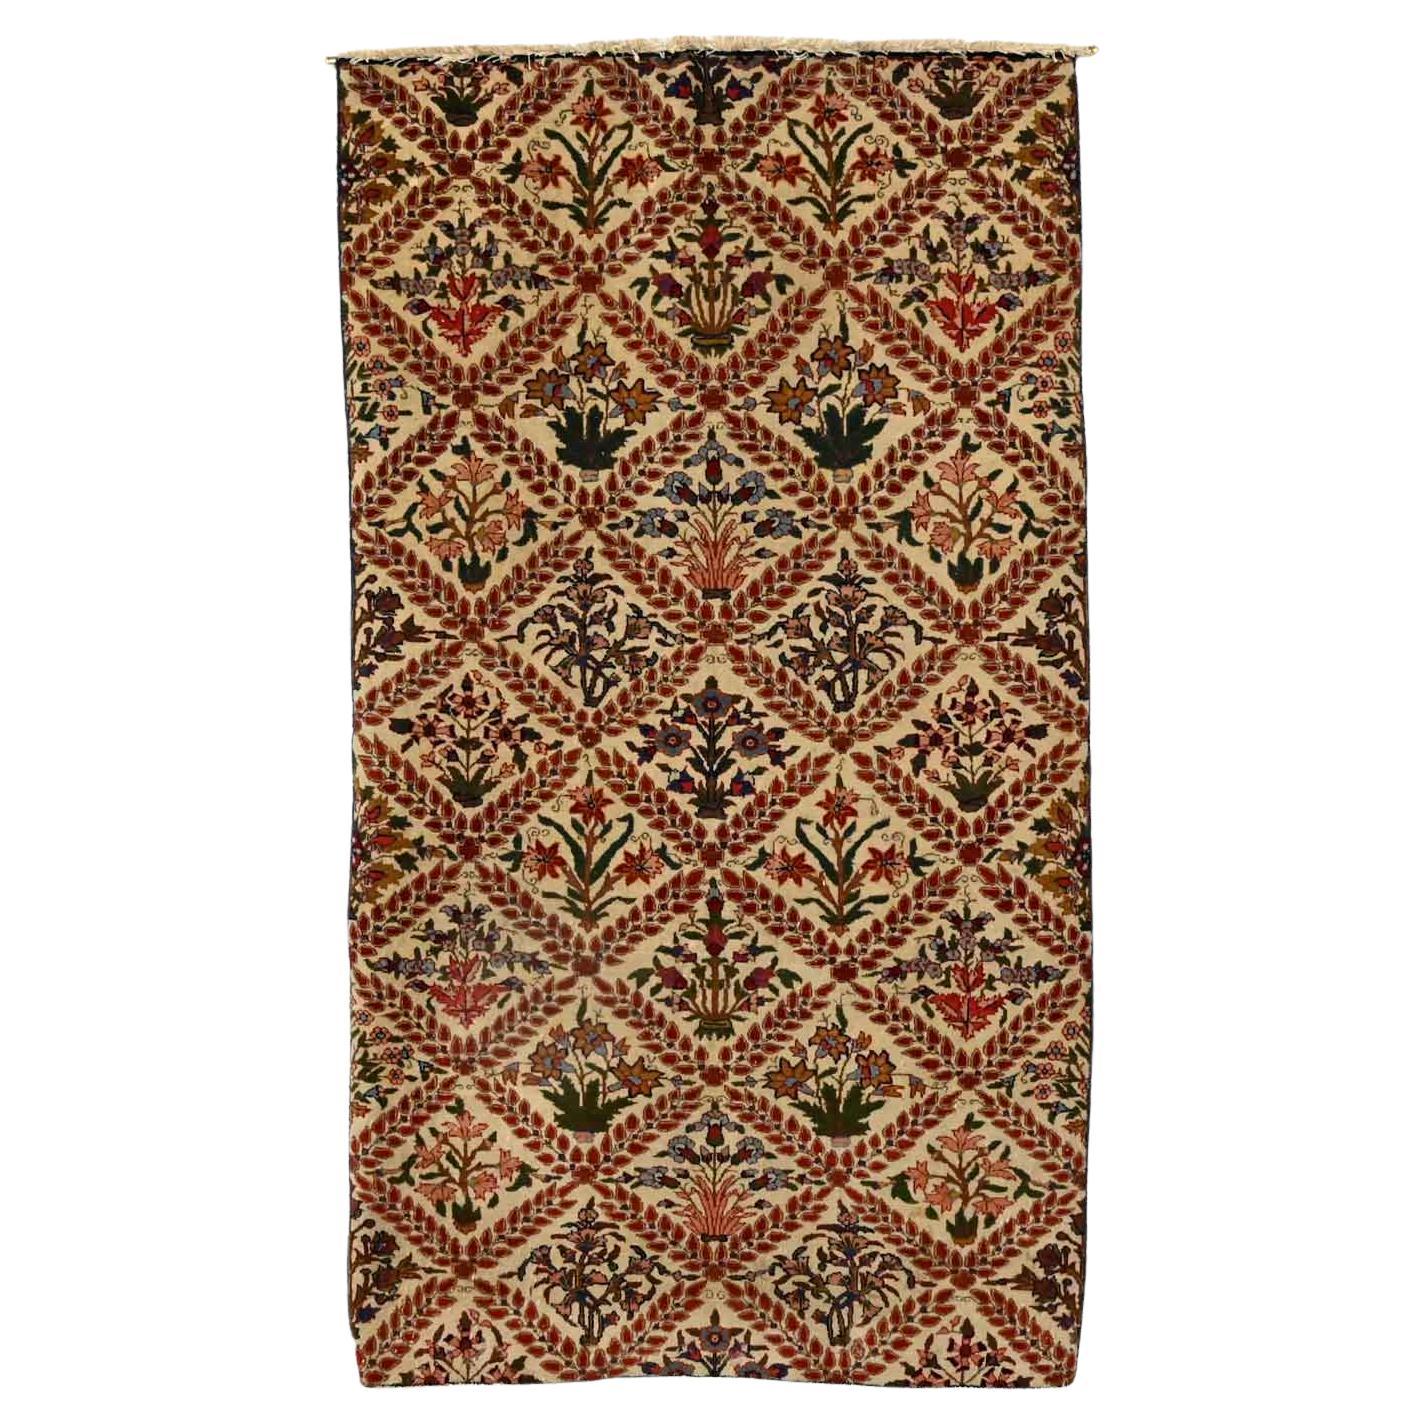 Gorgeous Antique Persian Oriental hand woven wool on cotton diamond leaf pattern & floral rug wall hanging. This wall hanging is a smaller piece cut from a larger rug and the edges have been bound. Beautiful condition, keeping in mind that this is